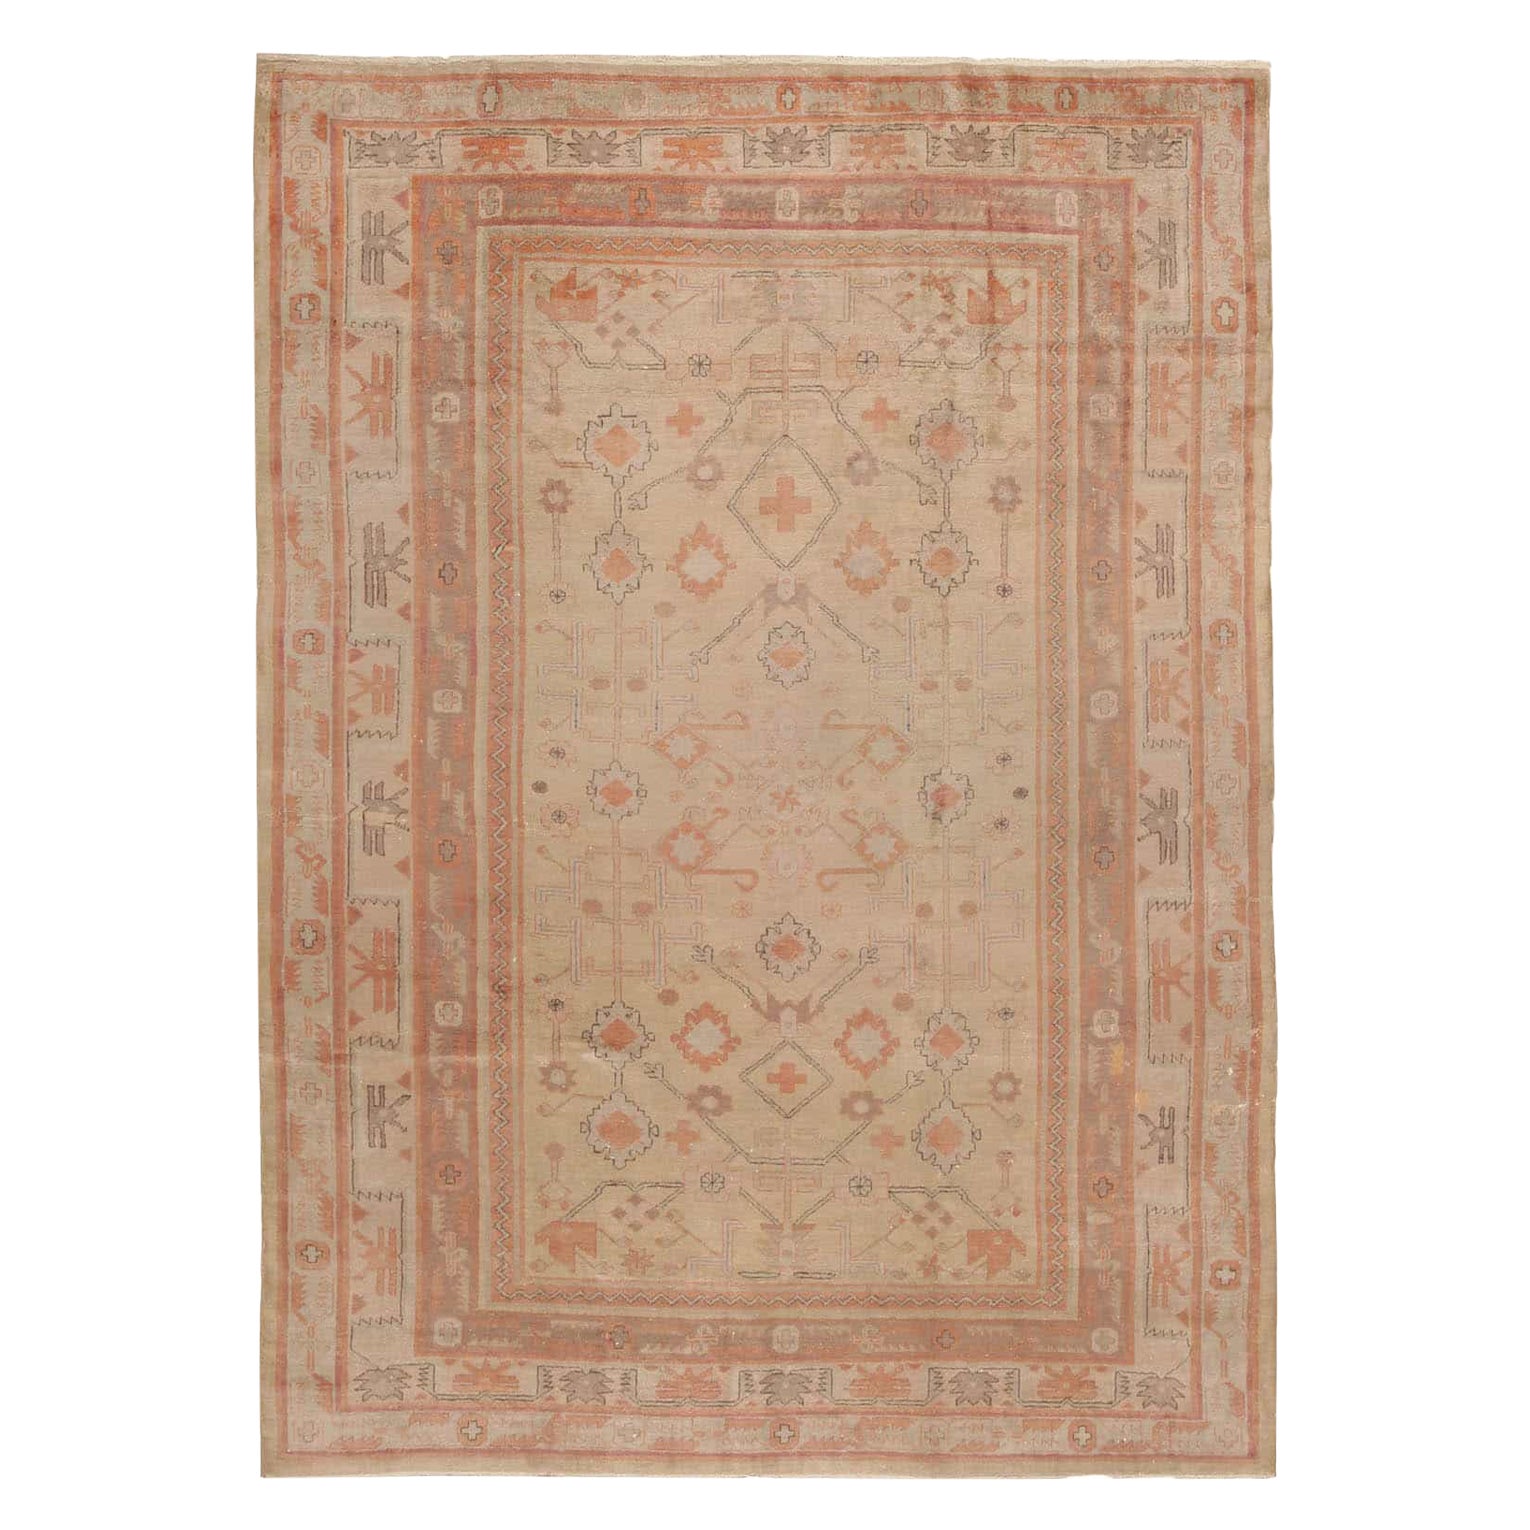 Nazmiyal Collection Antique Khotan Rug. Size: 6 ft 11 in x 9 ft 8 in 